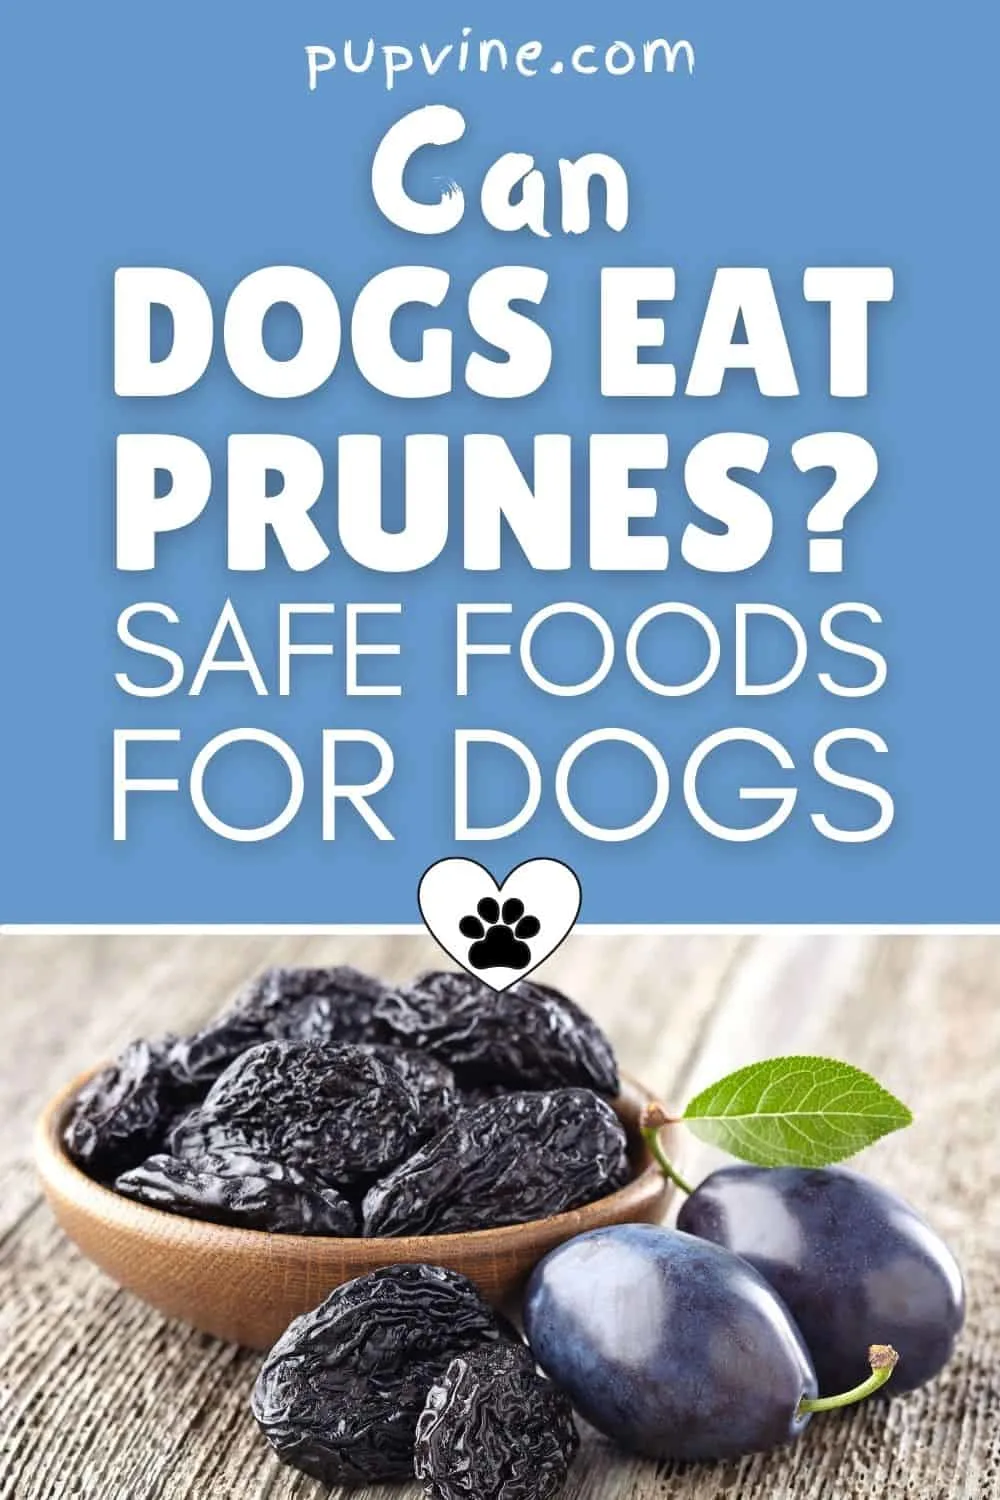 Can Dogs Eat Prunes? Safe Foods For Dogs